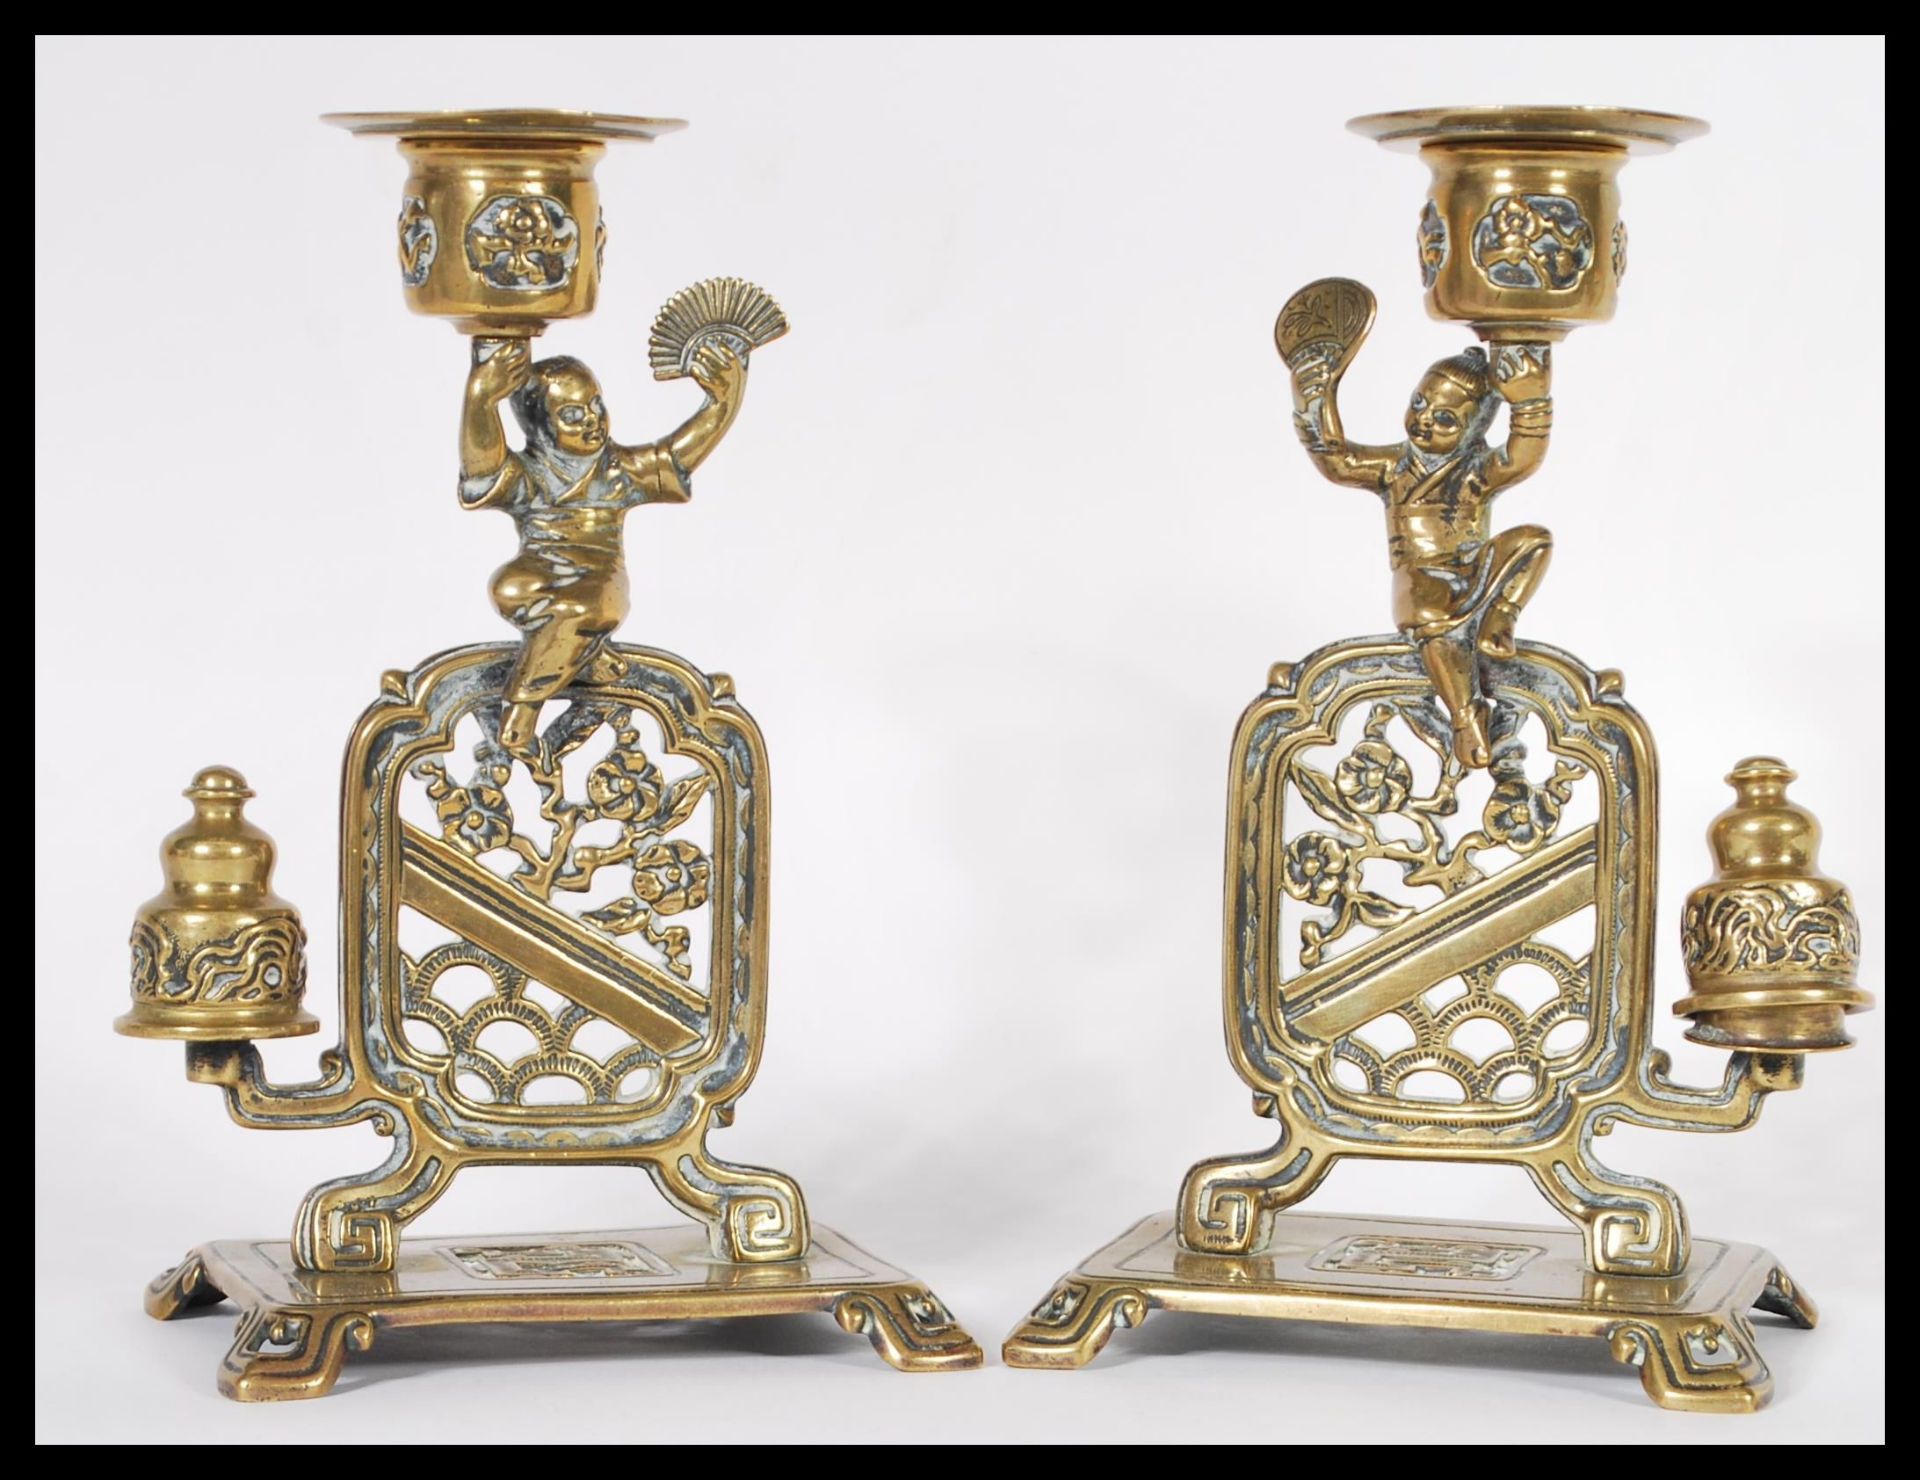 A fantastic pair of 19th Century Chinese figural bronze candlesticks raised on square bases with